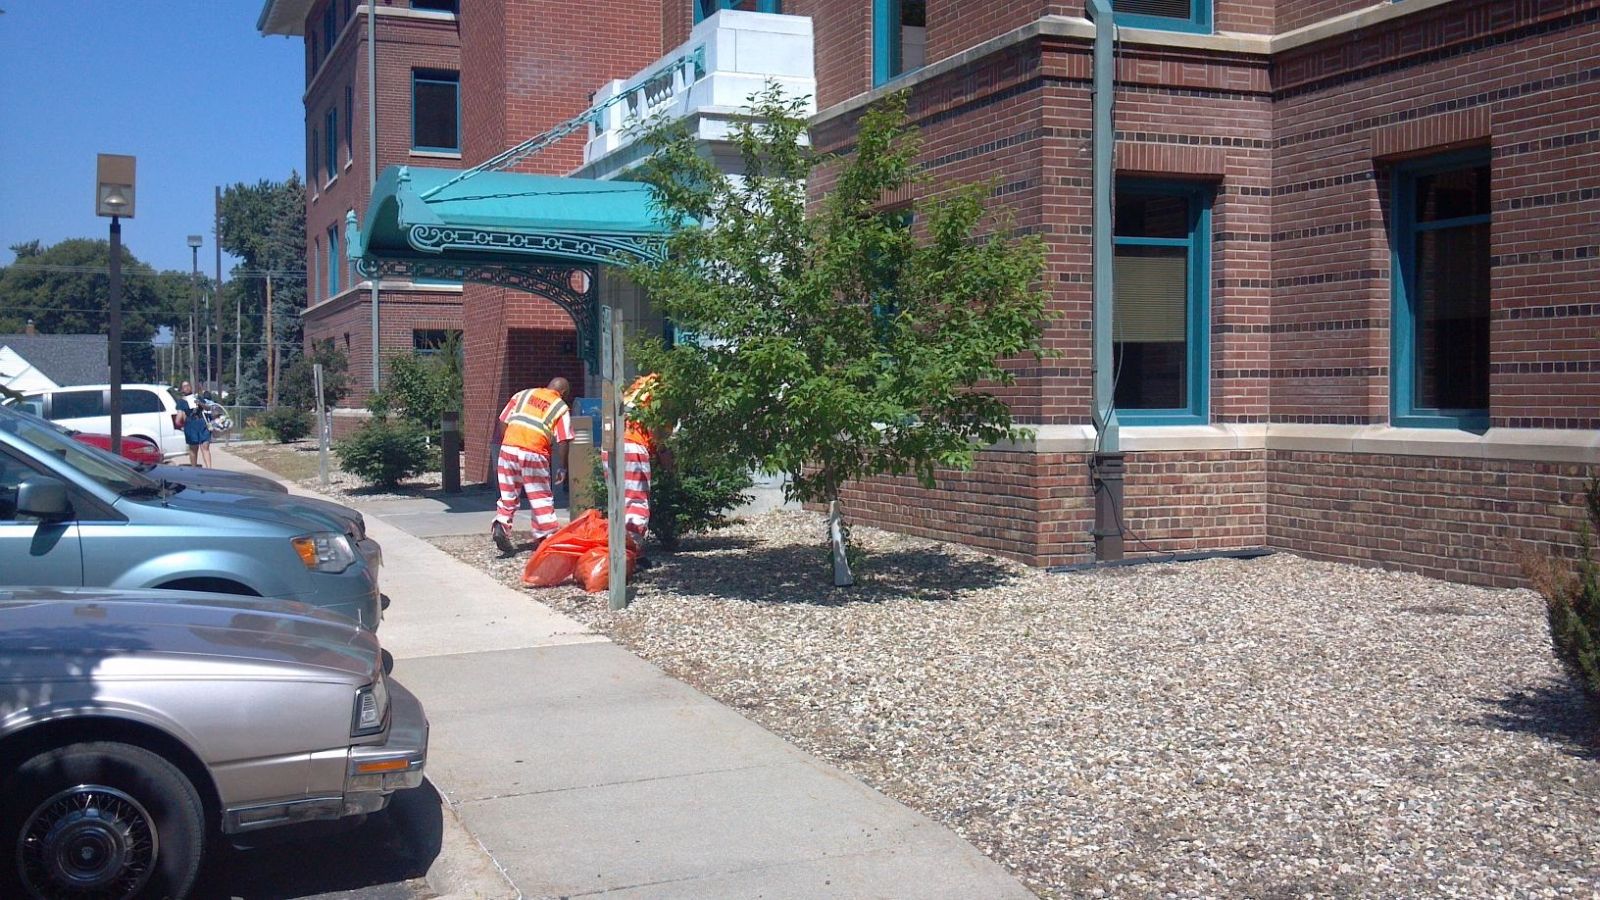 Inmates working together to clean up and maintain landscaping